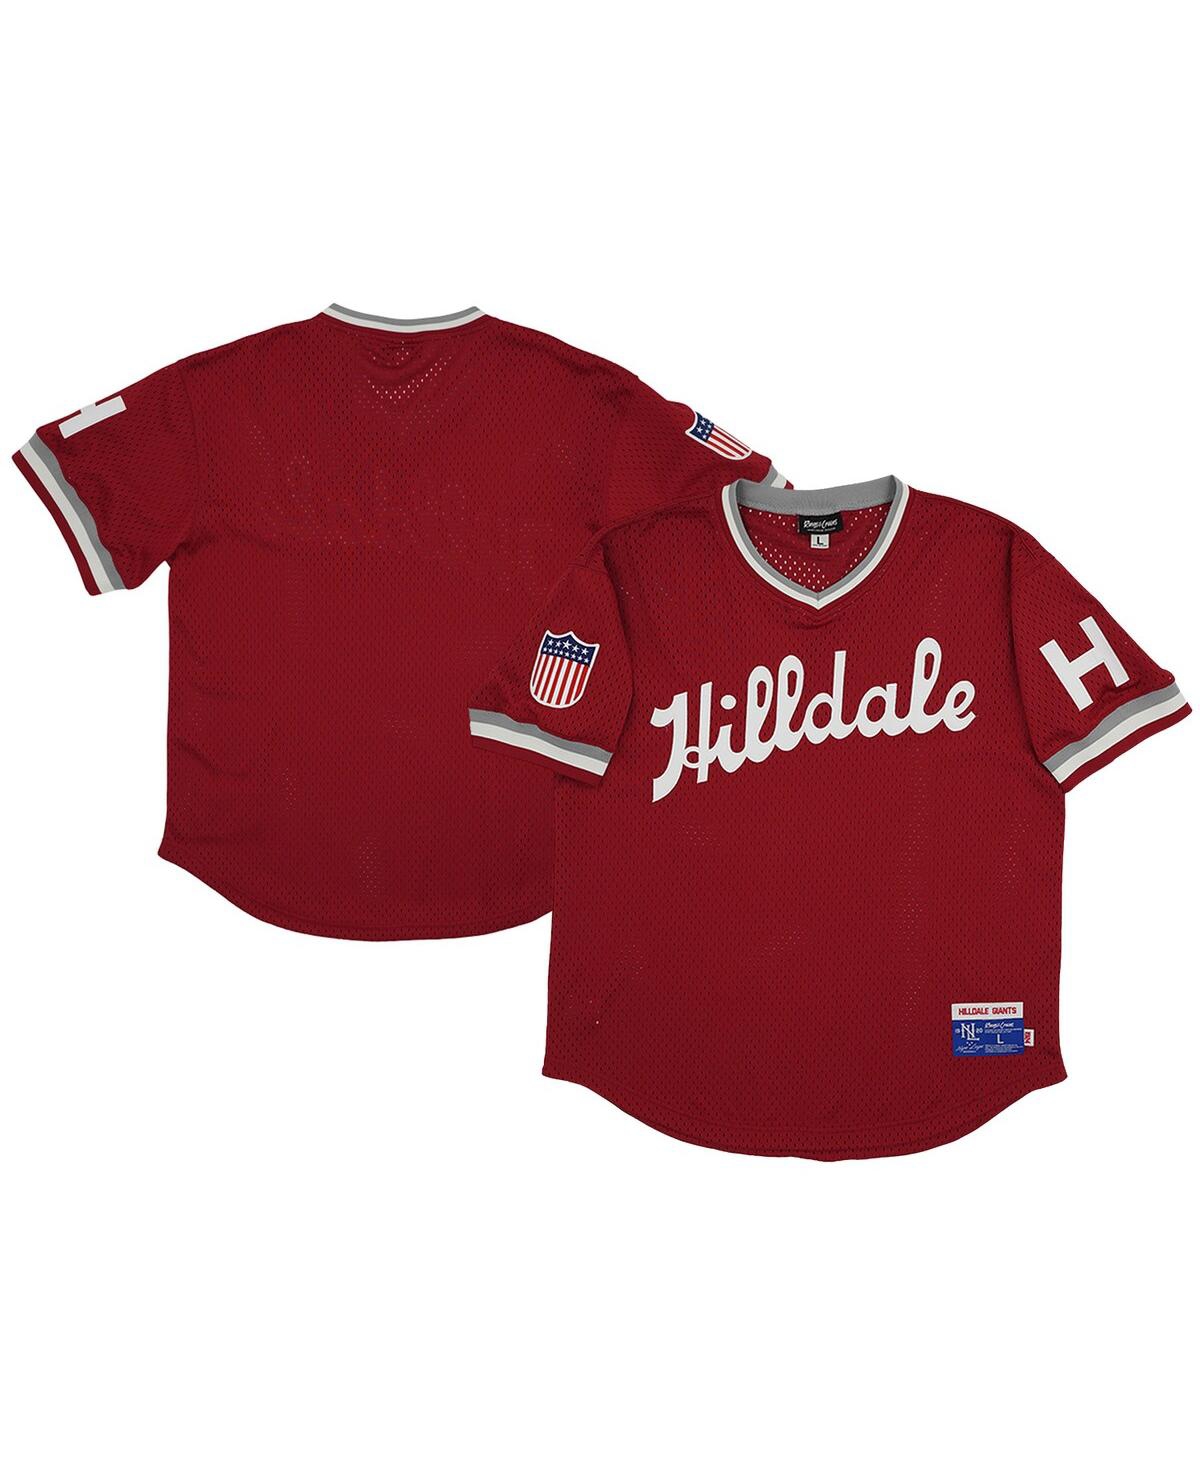 Men's Rings & Crwns Red Distressed Hilldale Club Mesh Replica V-Neck Jersey - Red